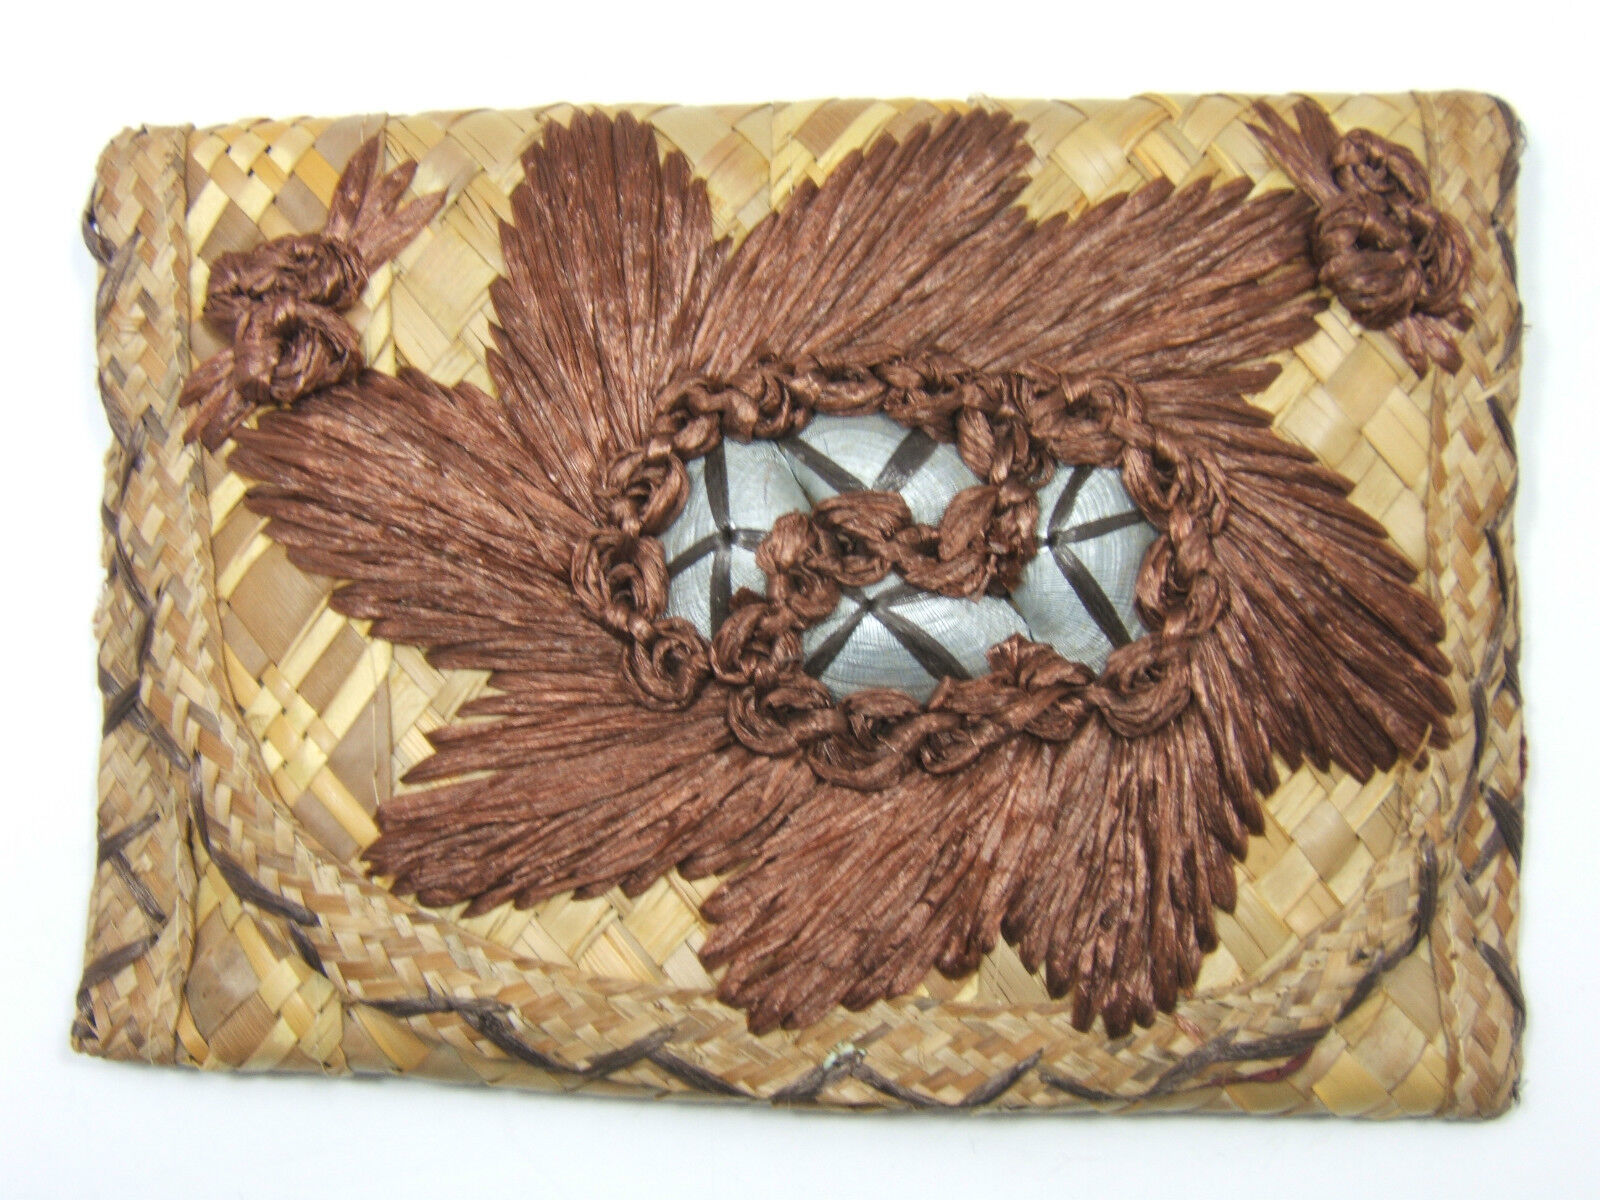 Antique Hand Woven Reed Purse  Shells & Flowers  Hawaii??  Very Nice Condition